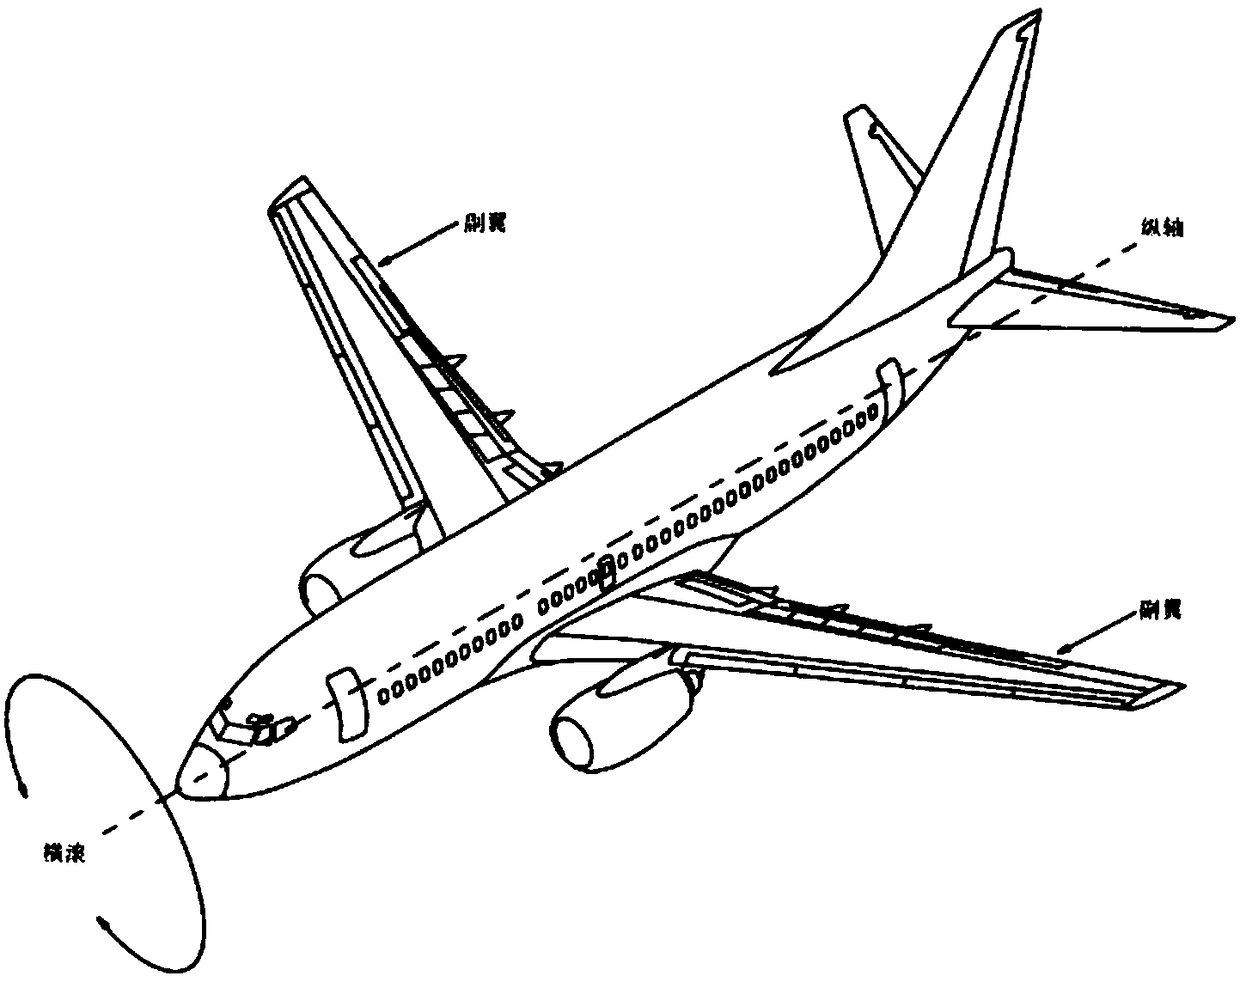 An operation efficiency increasing method based on a position change of an aileron connector